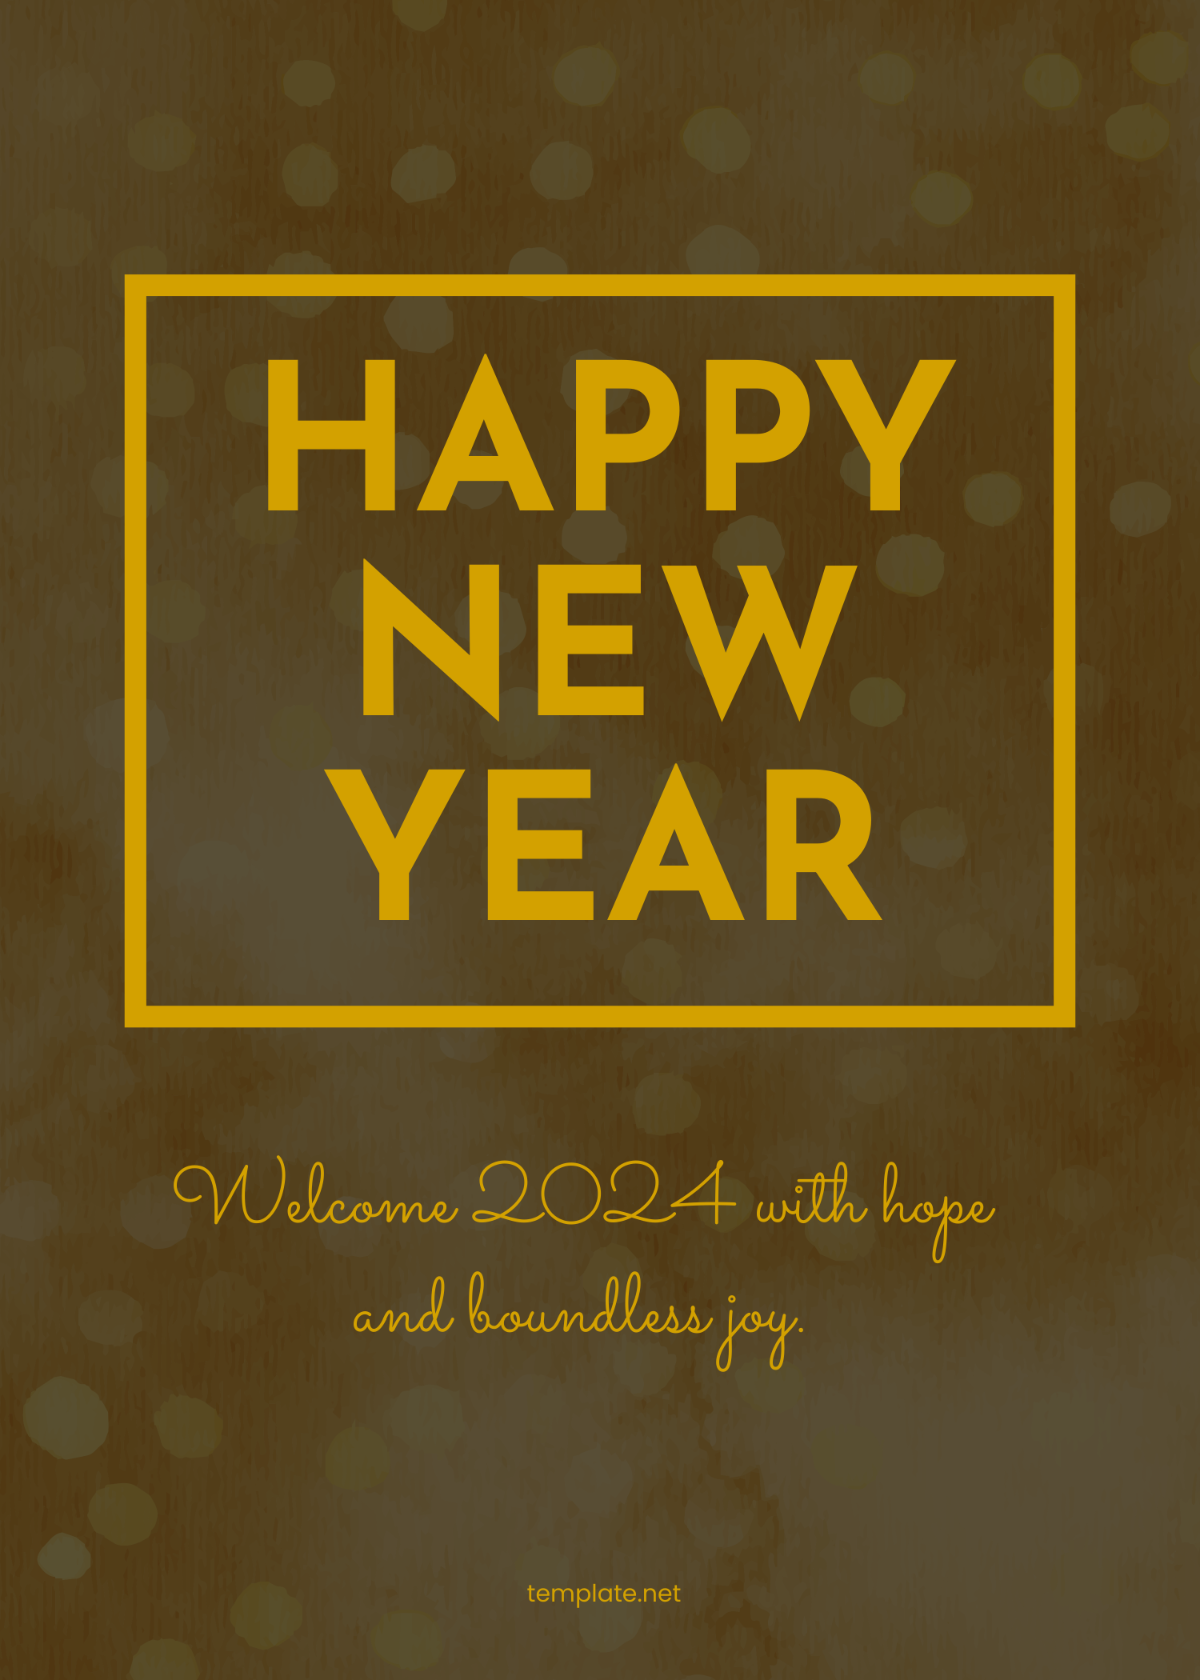 Free New Year Wishes 2024 Template